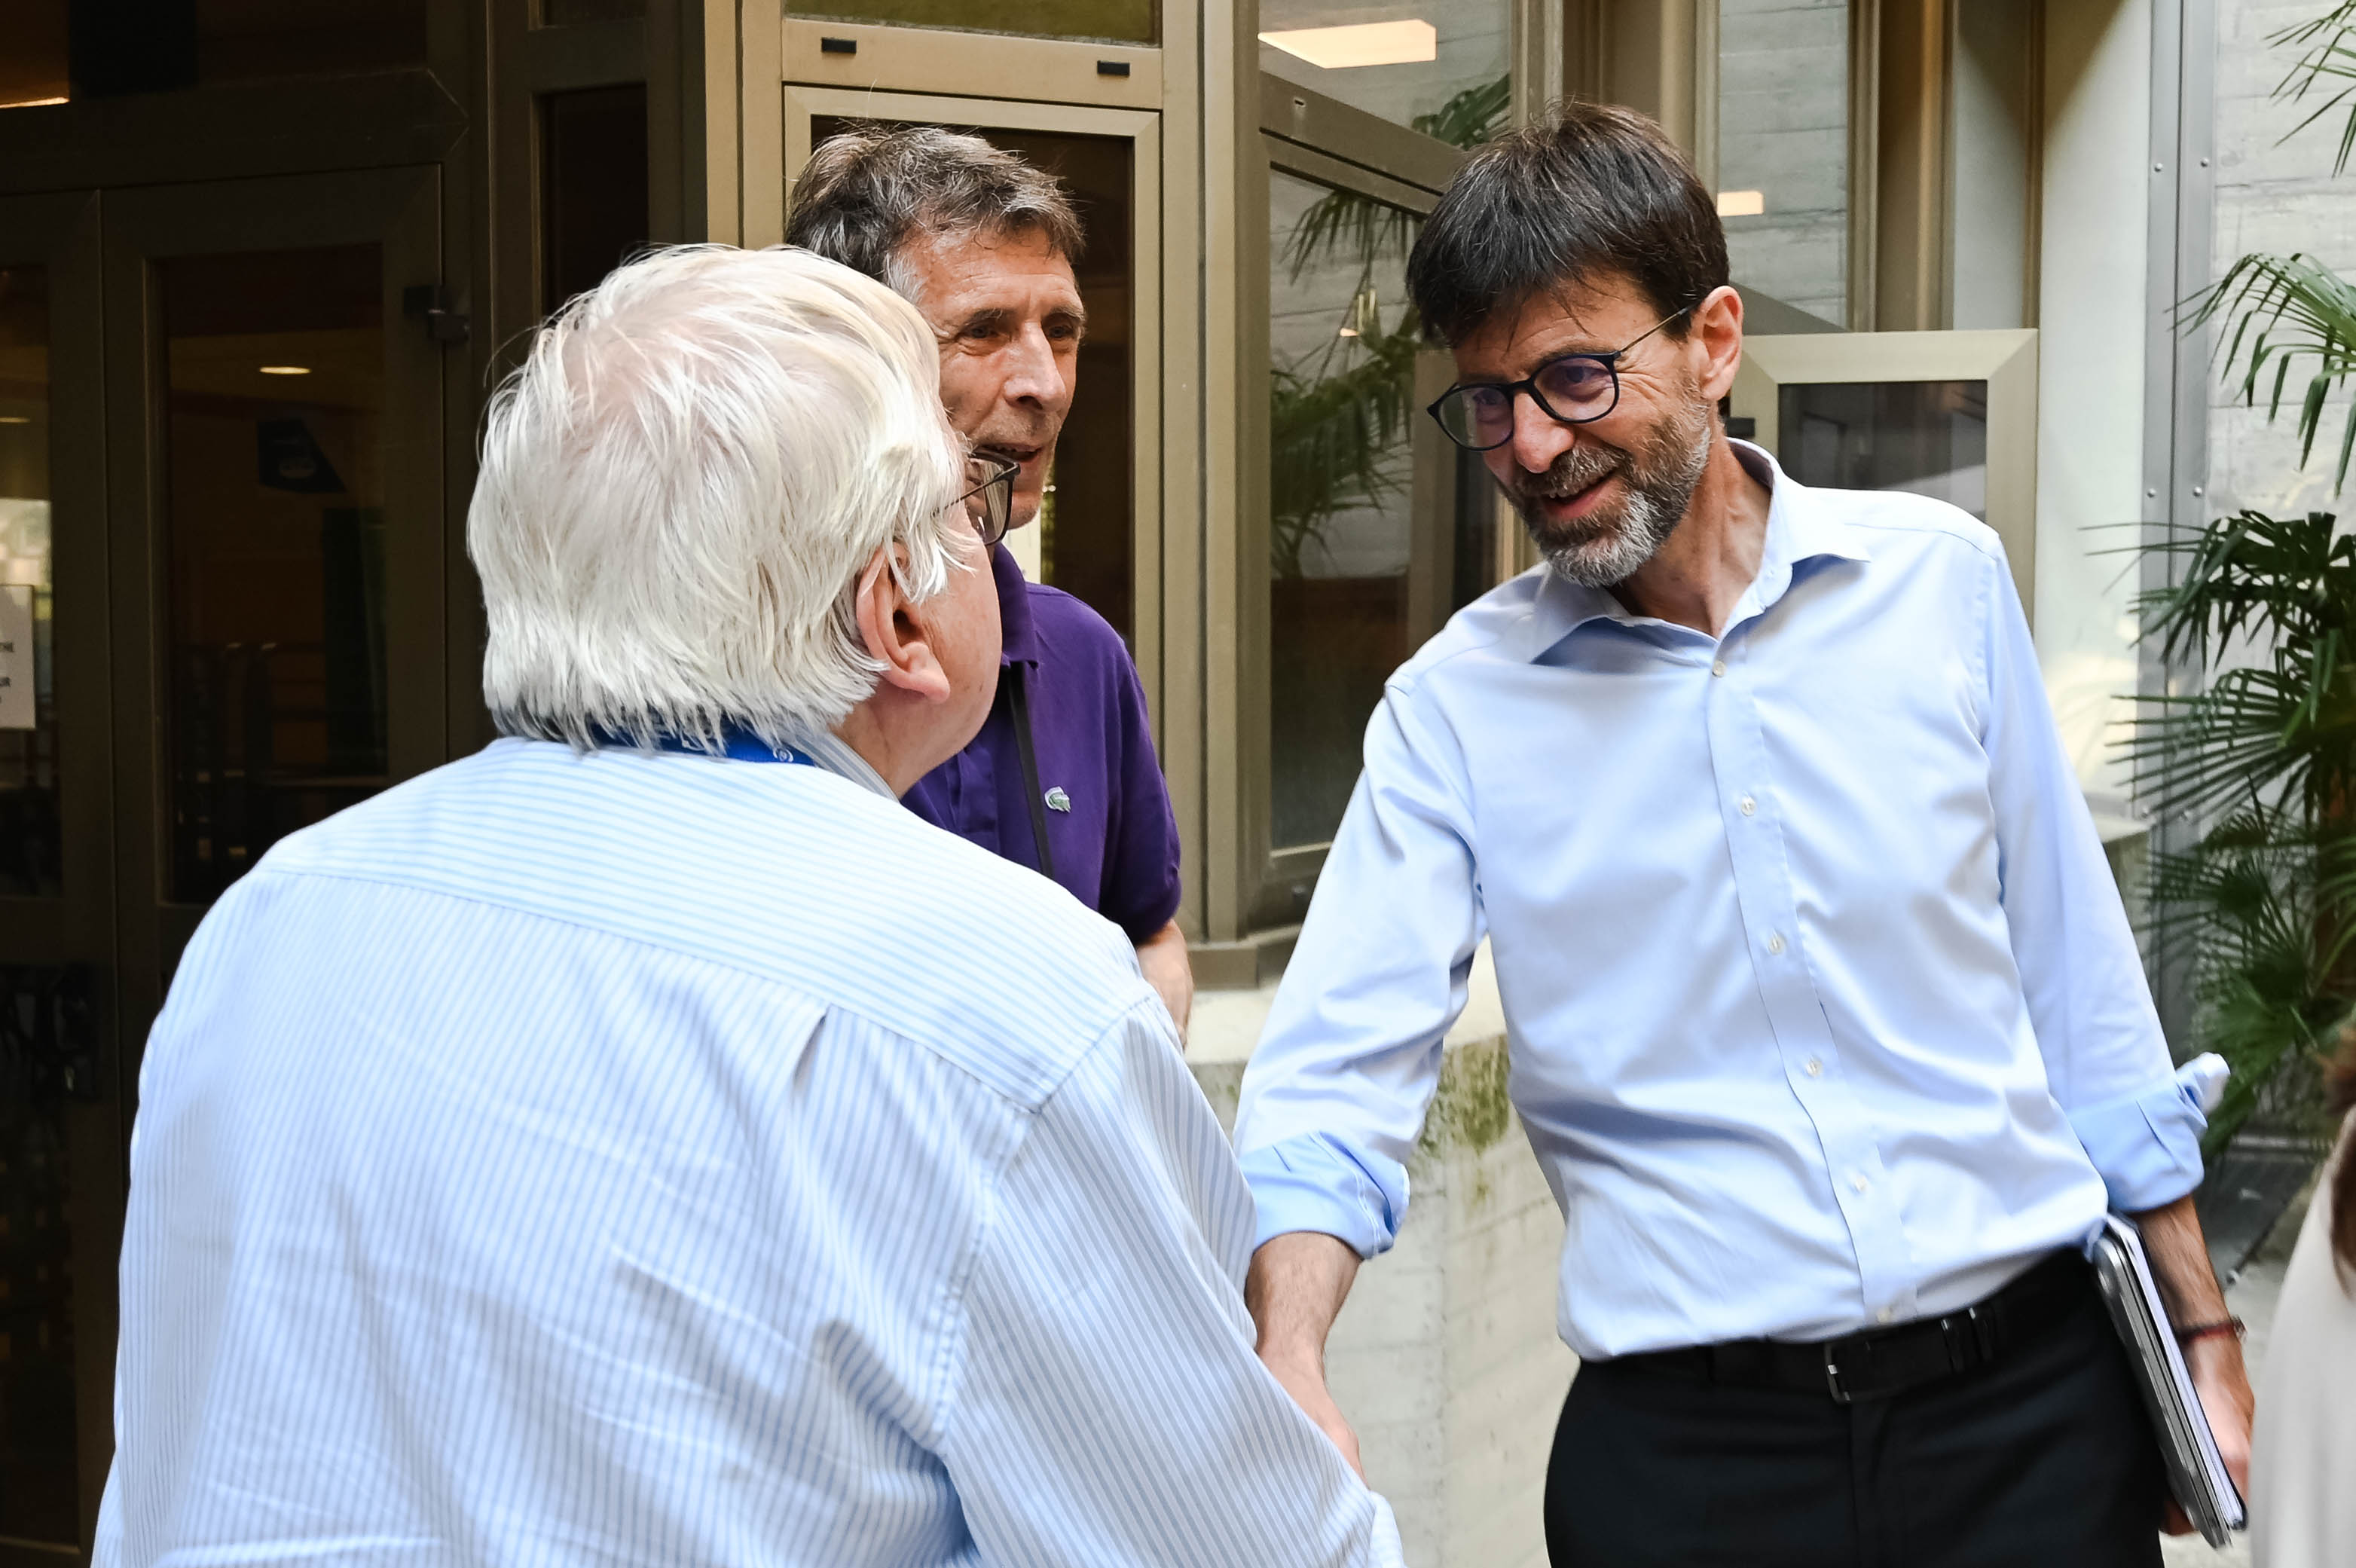 Richard Catlow meeting Sandro Scandolo, ICTP's Head of Research